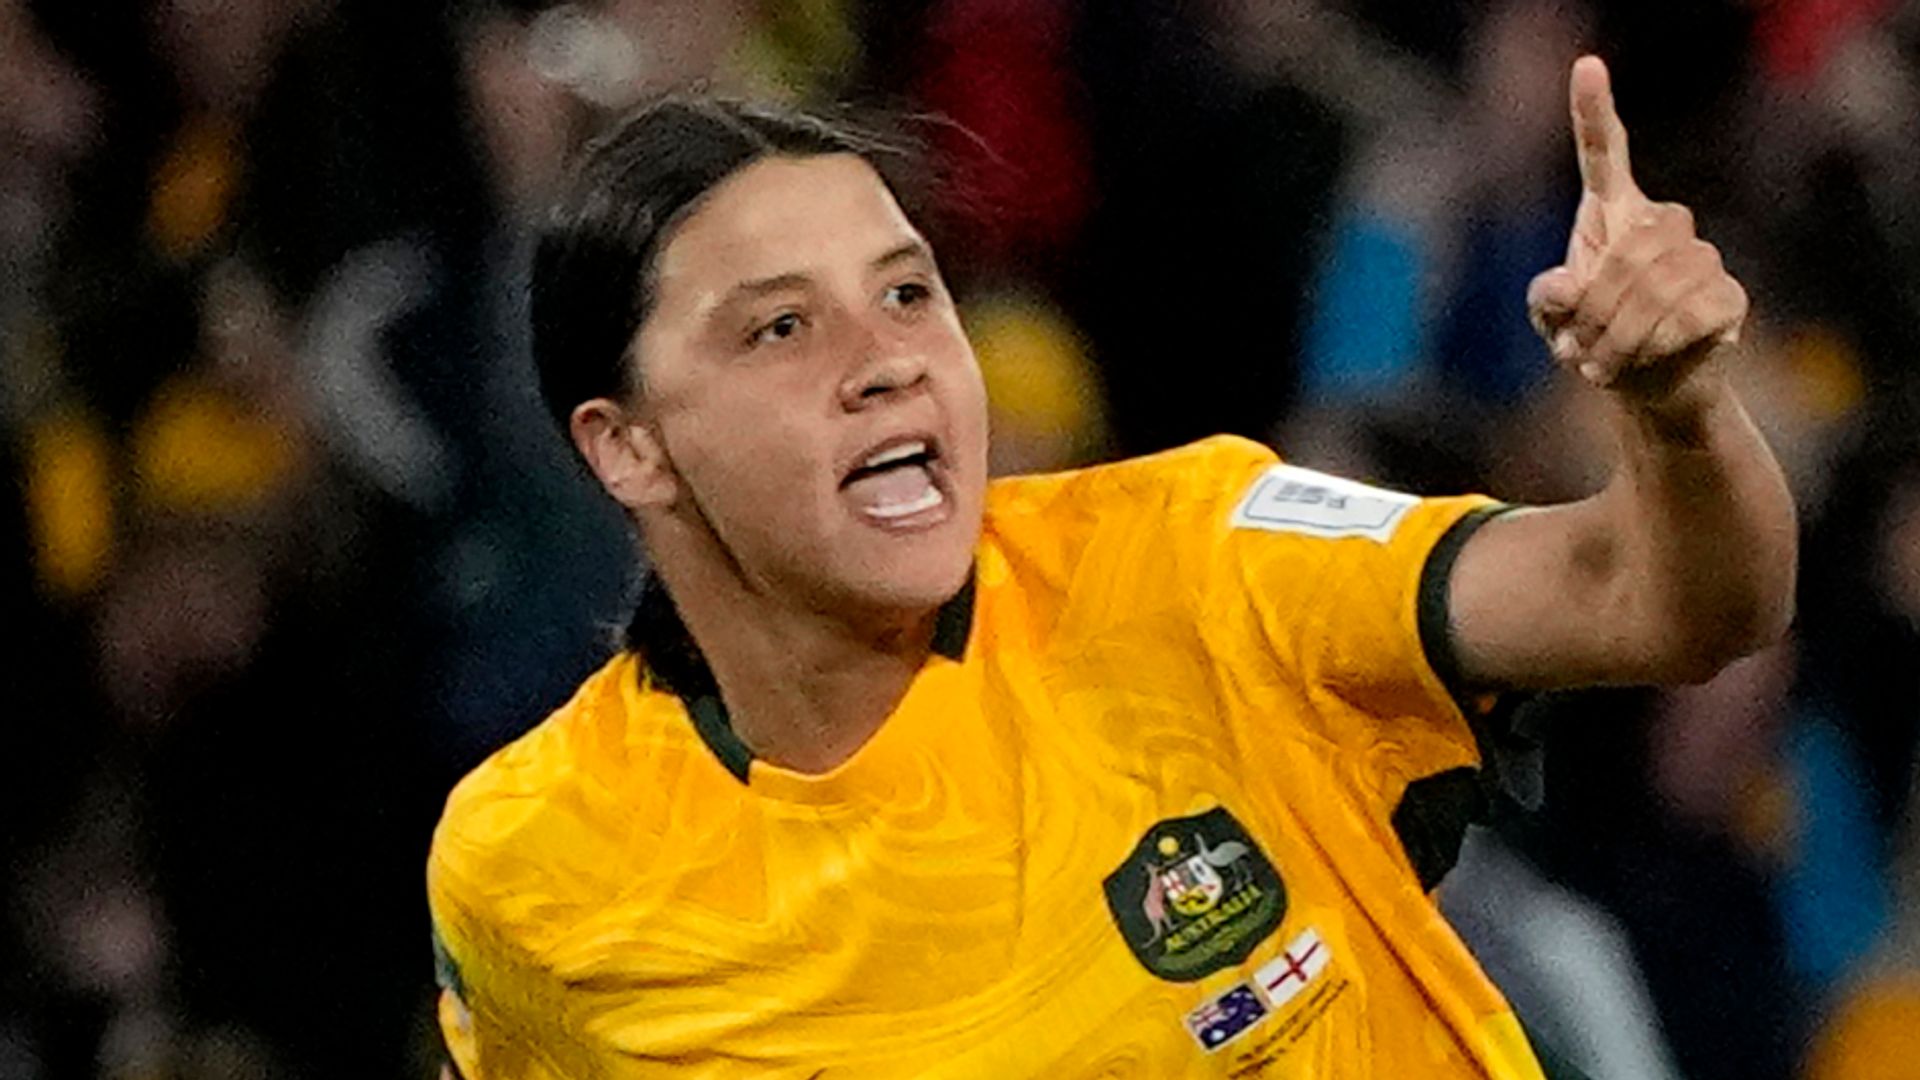 Australia striker Sam Kerr ruled out of Olympics due to injury